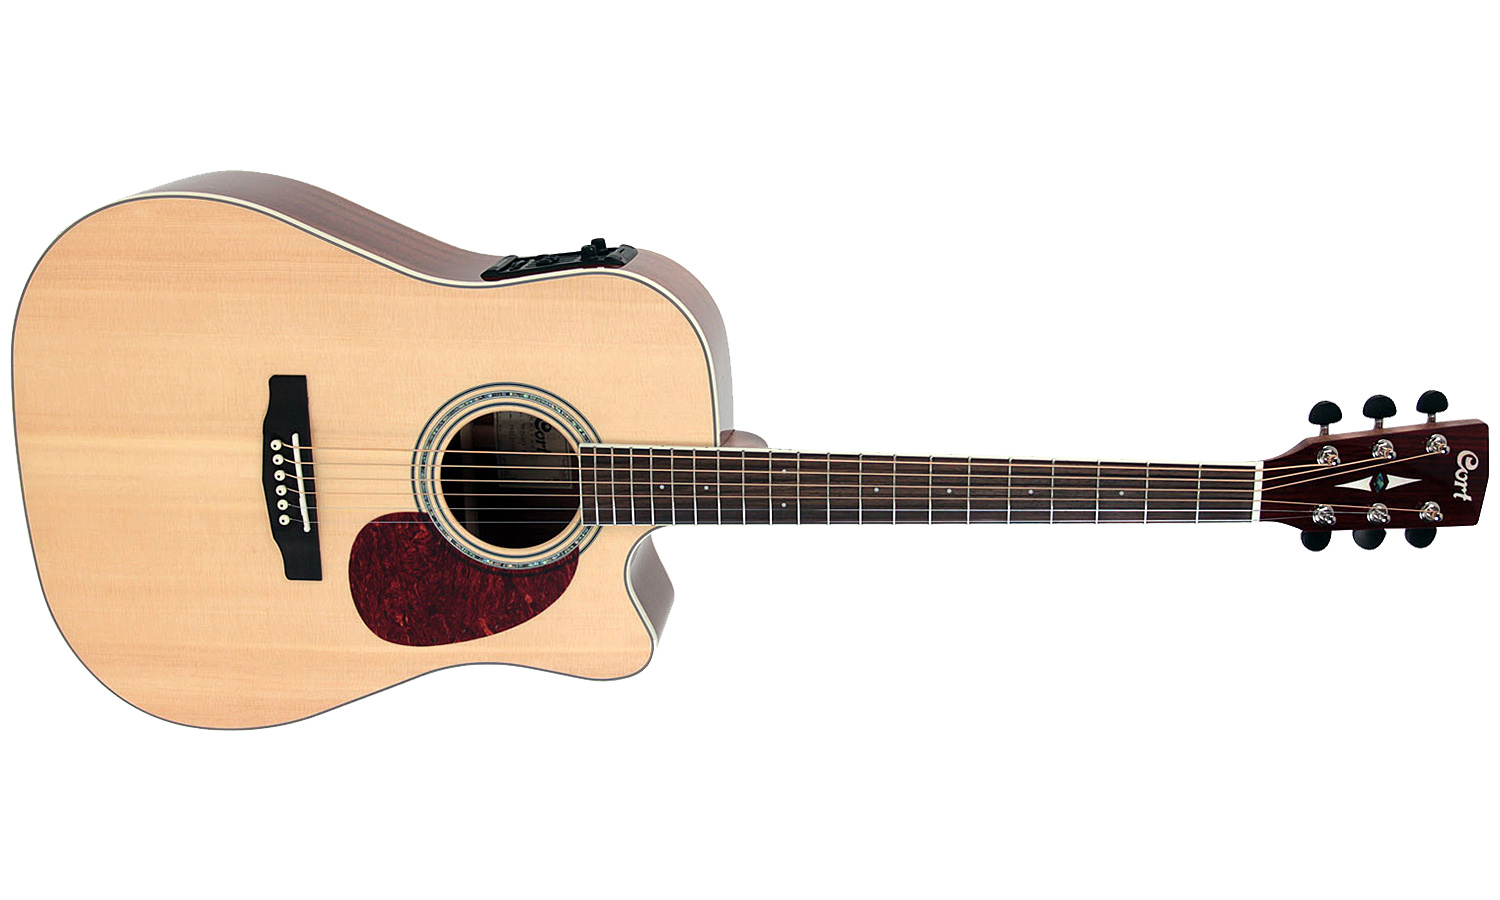 Cort Mr710fx Dreadnought Cw Epicea Acajou Ova - Natural Glossy - Electro acoustic guitar - Variation 1